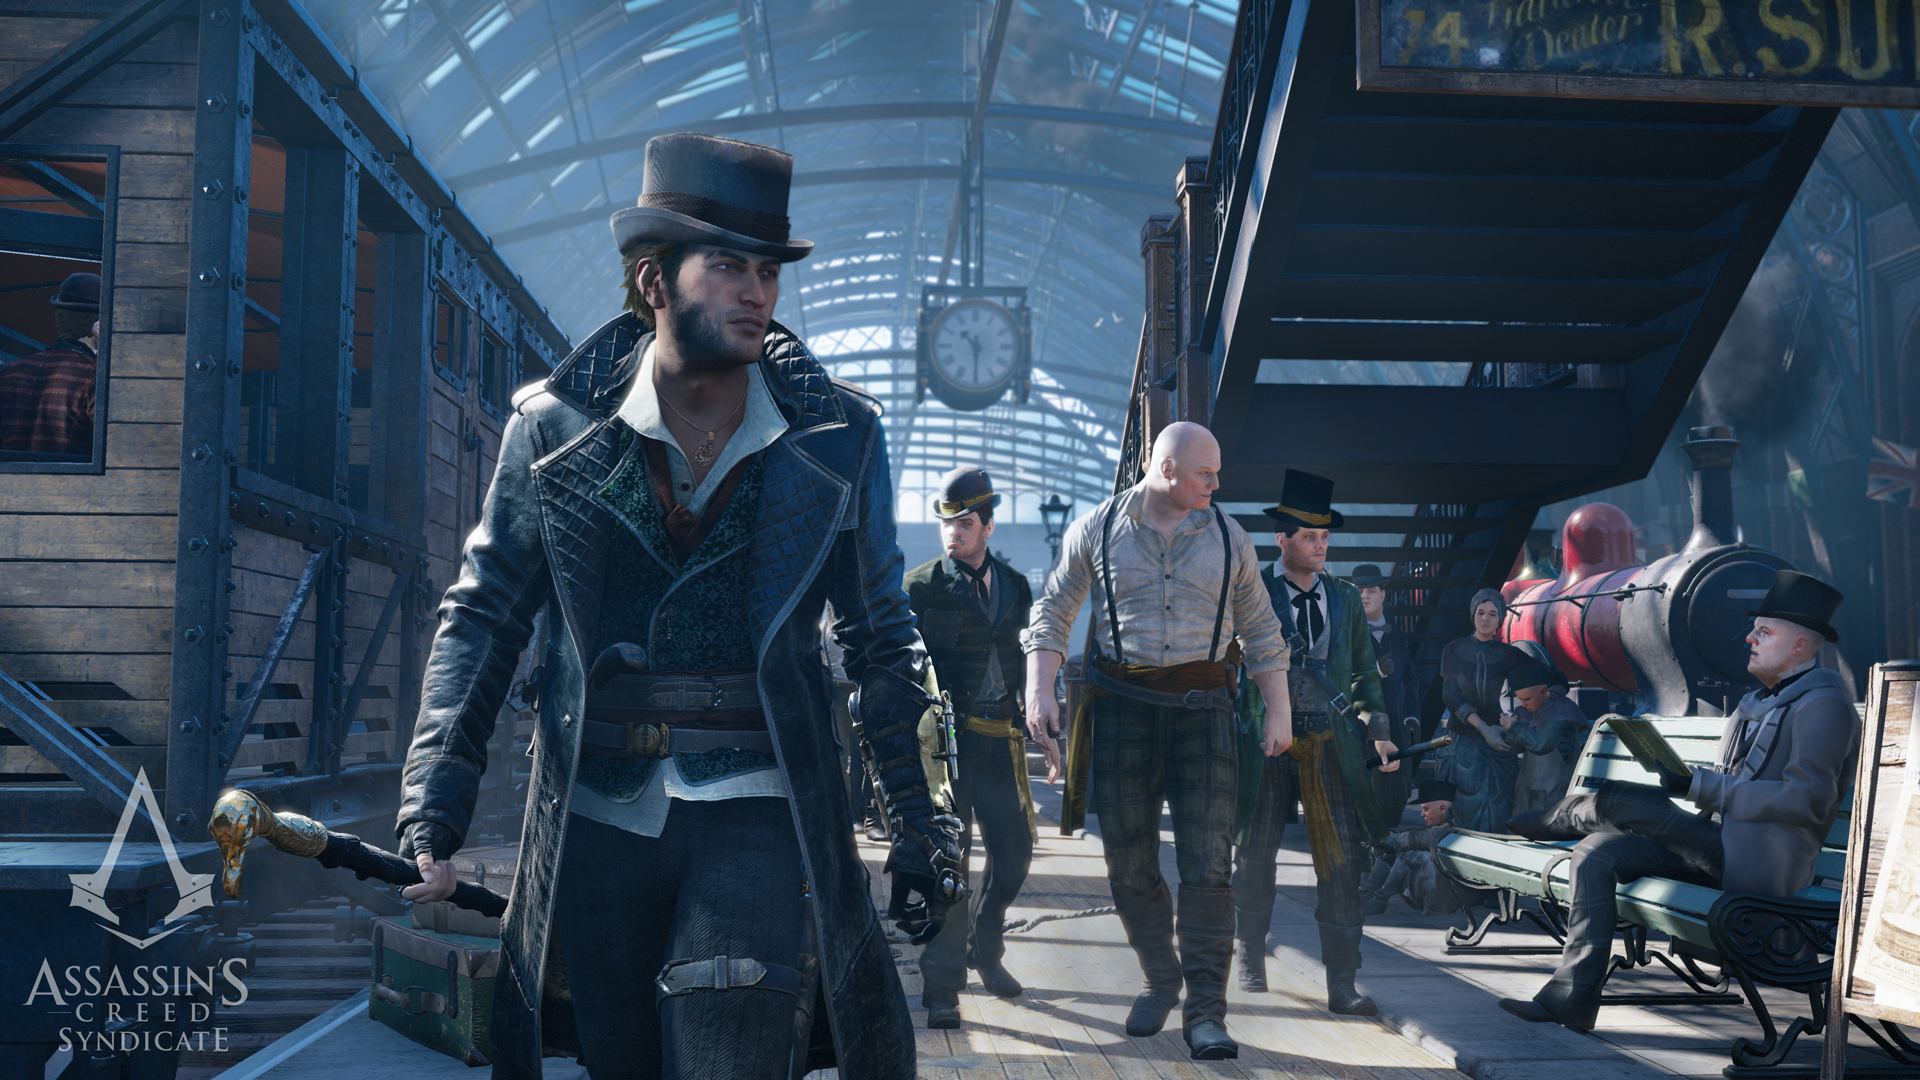 best Assassin's Creed games: A group of men at a train station